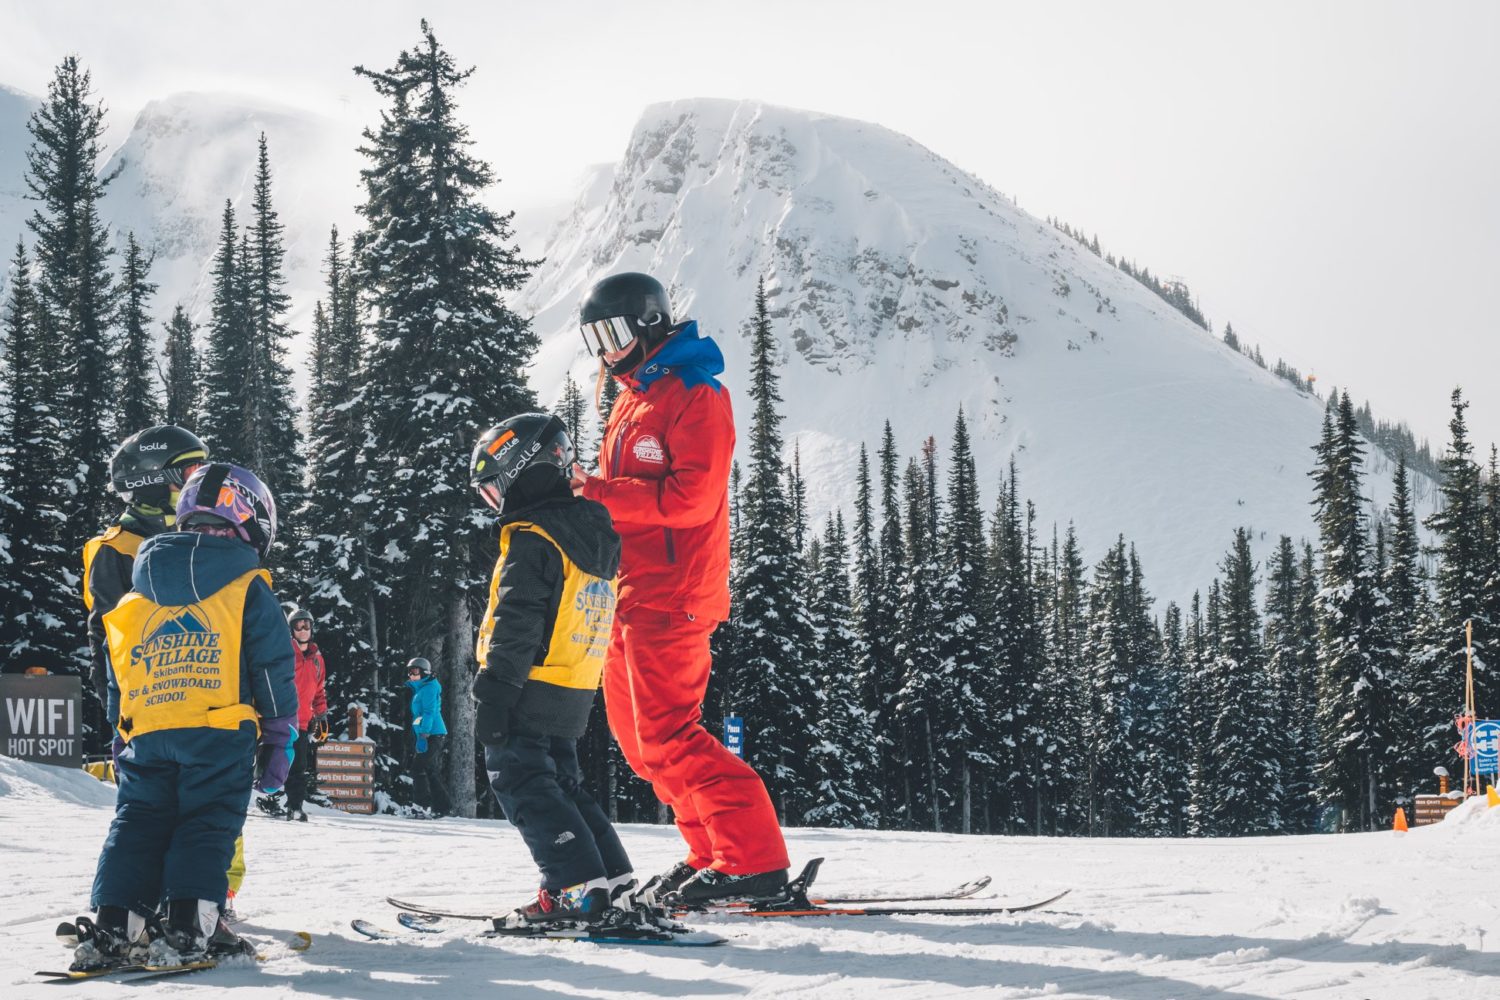 Ski lessons are included with some ski holidays